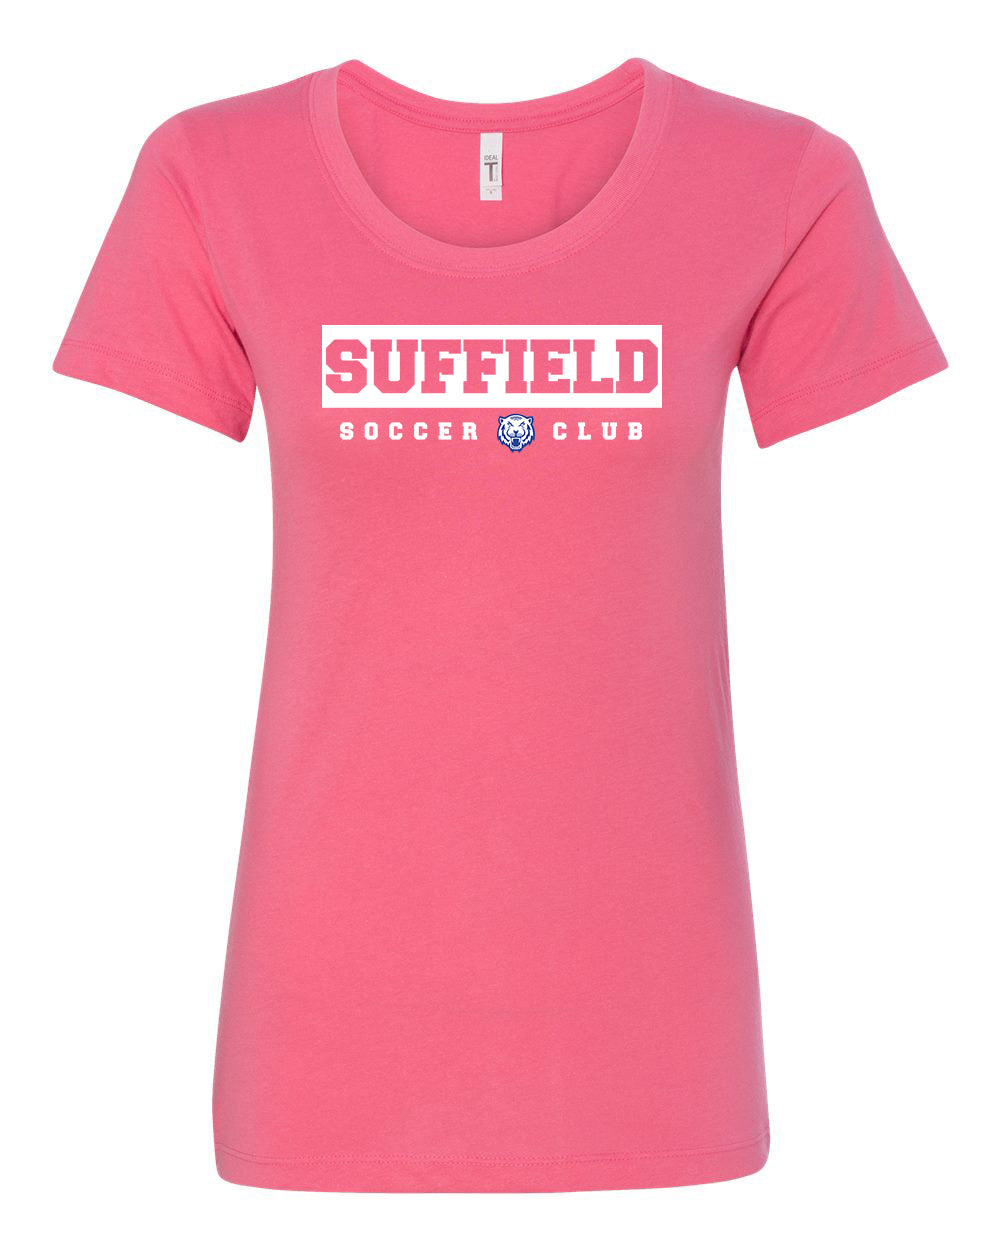 Suffield Soccer Club Ladies T-shirt "Rectangle" - 1510 (color options available)